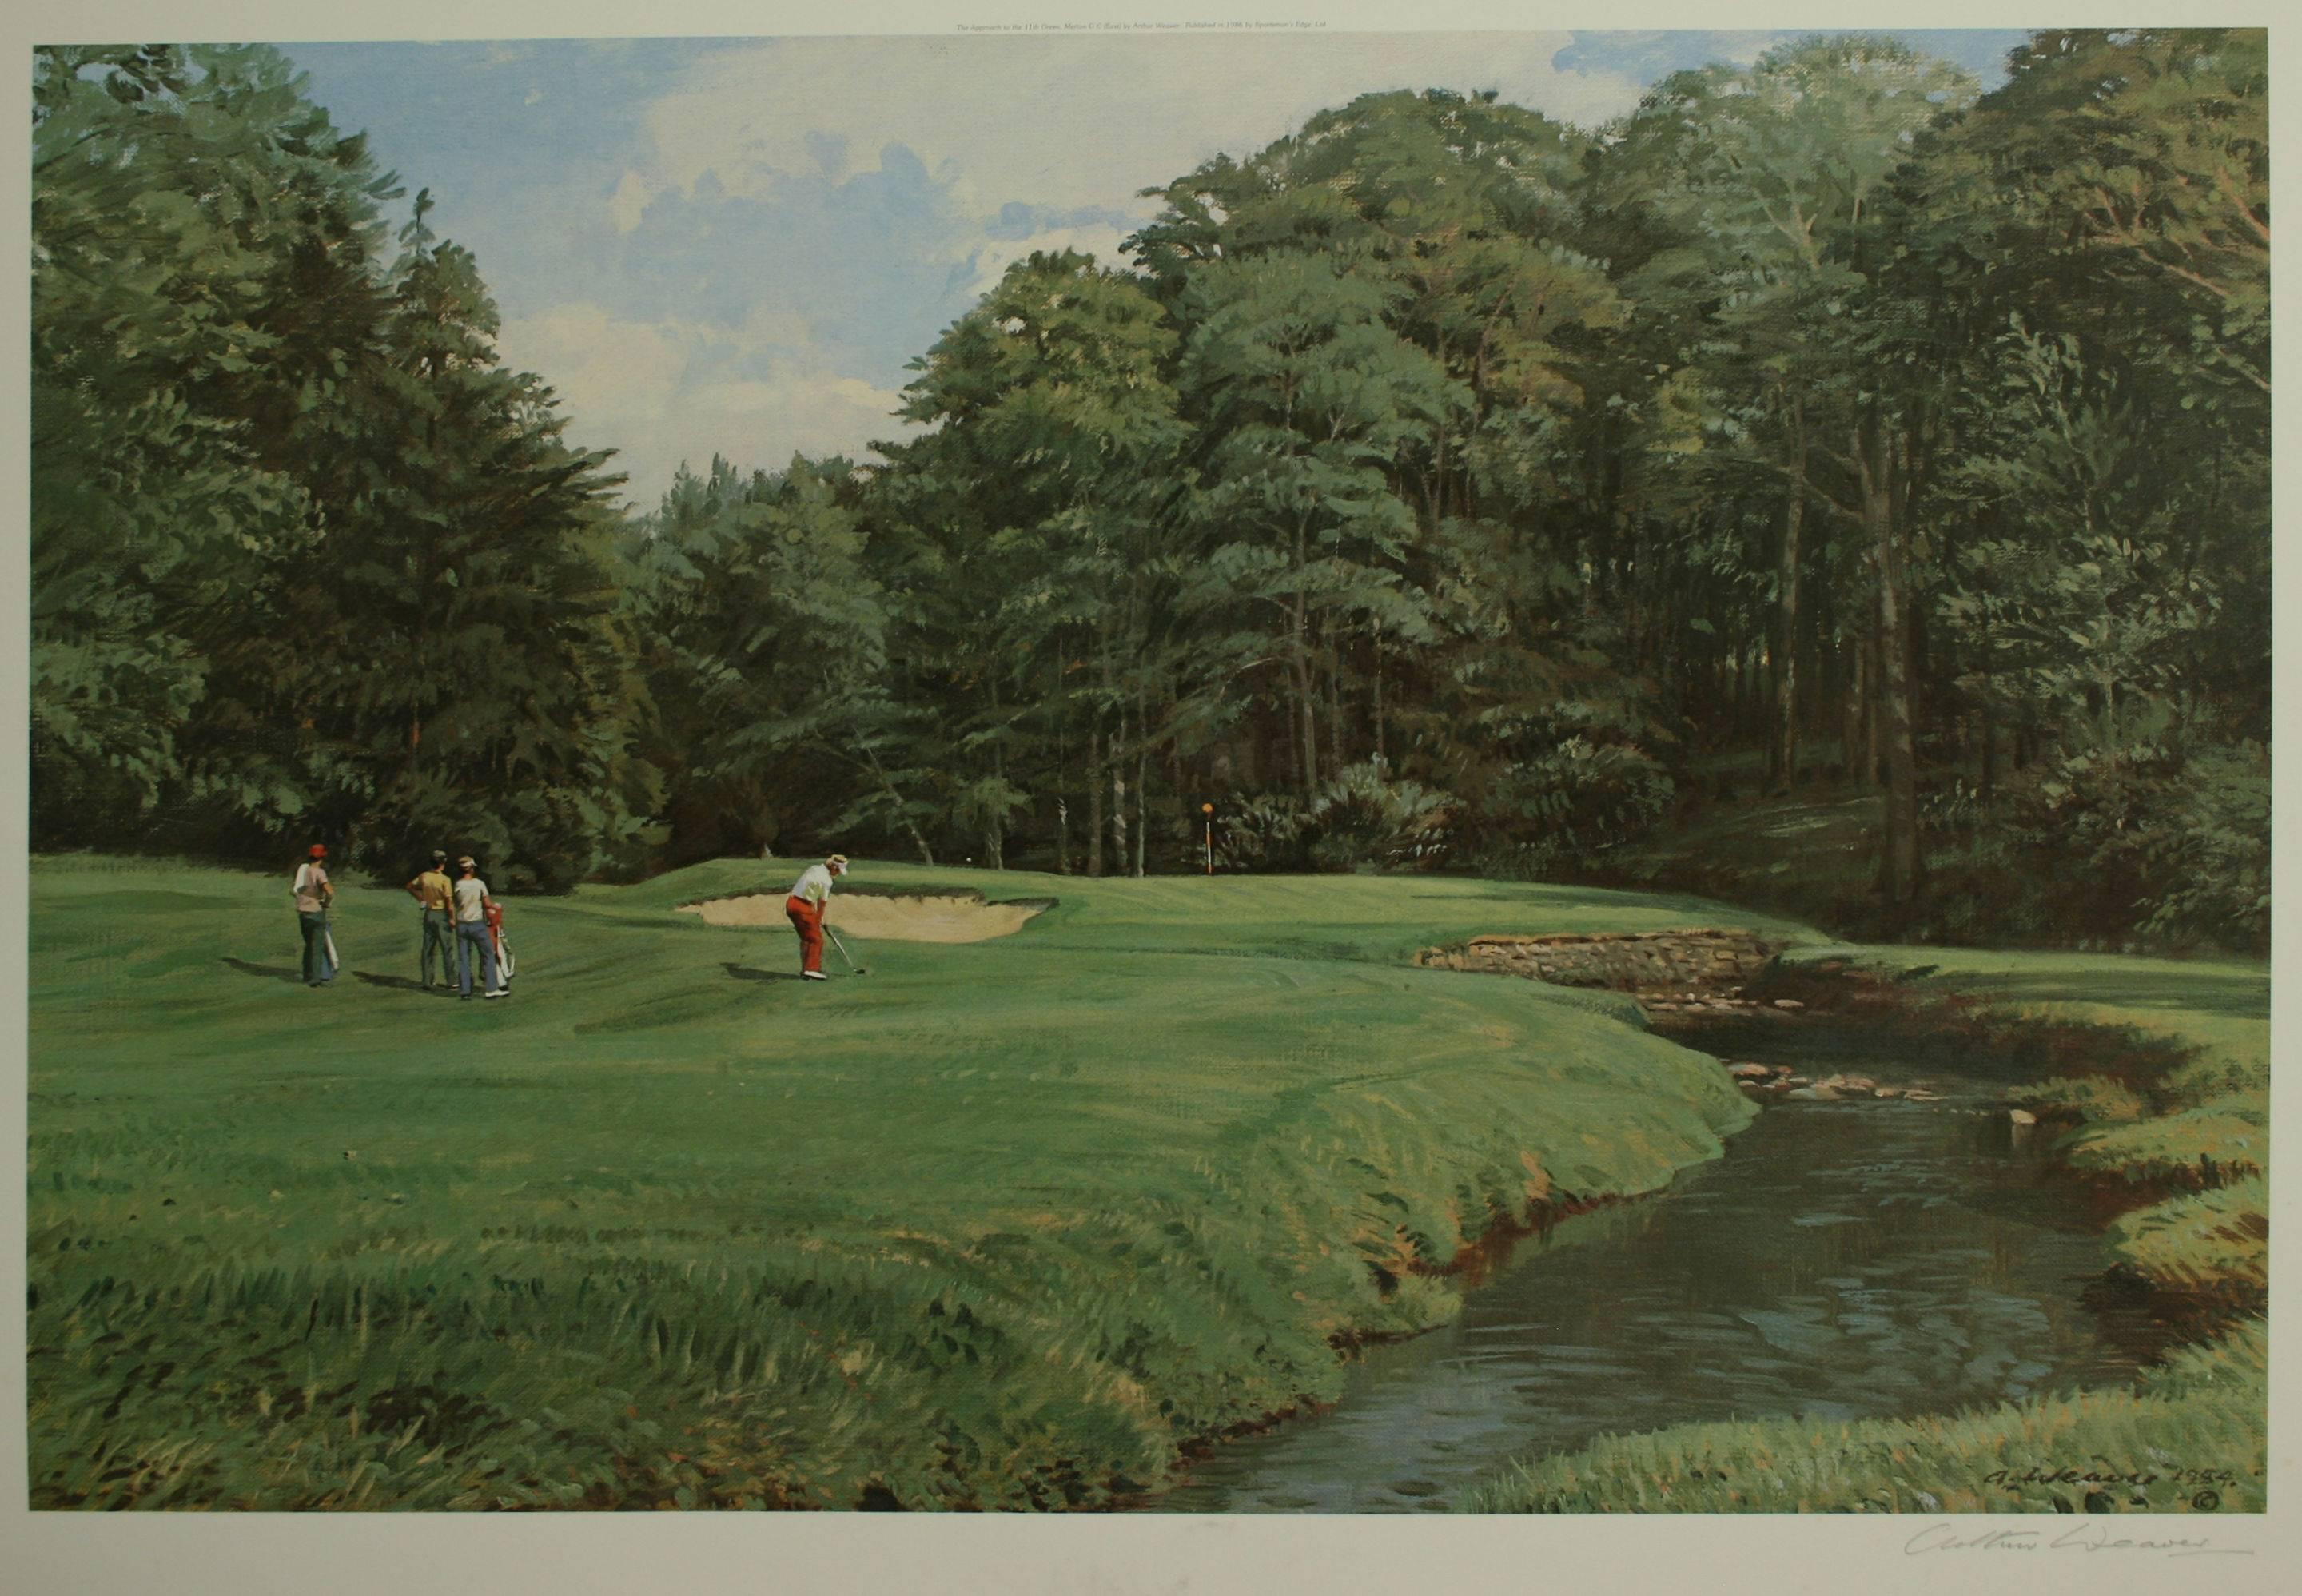 Arthur Weaver golf print, Merion Golf Club.
A good large golfing photolithograph taken from the original painting by Arthur Weaver; the approach to the 11th green, Merion GC (East). Pub. 1986 by Sportsman's edge, Ltd.
Signed in pencil by the